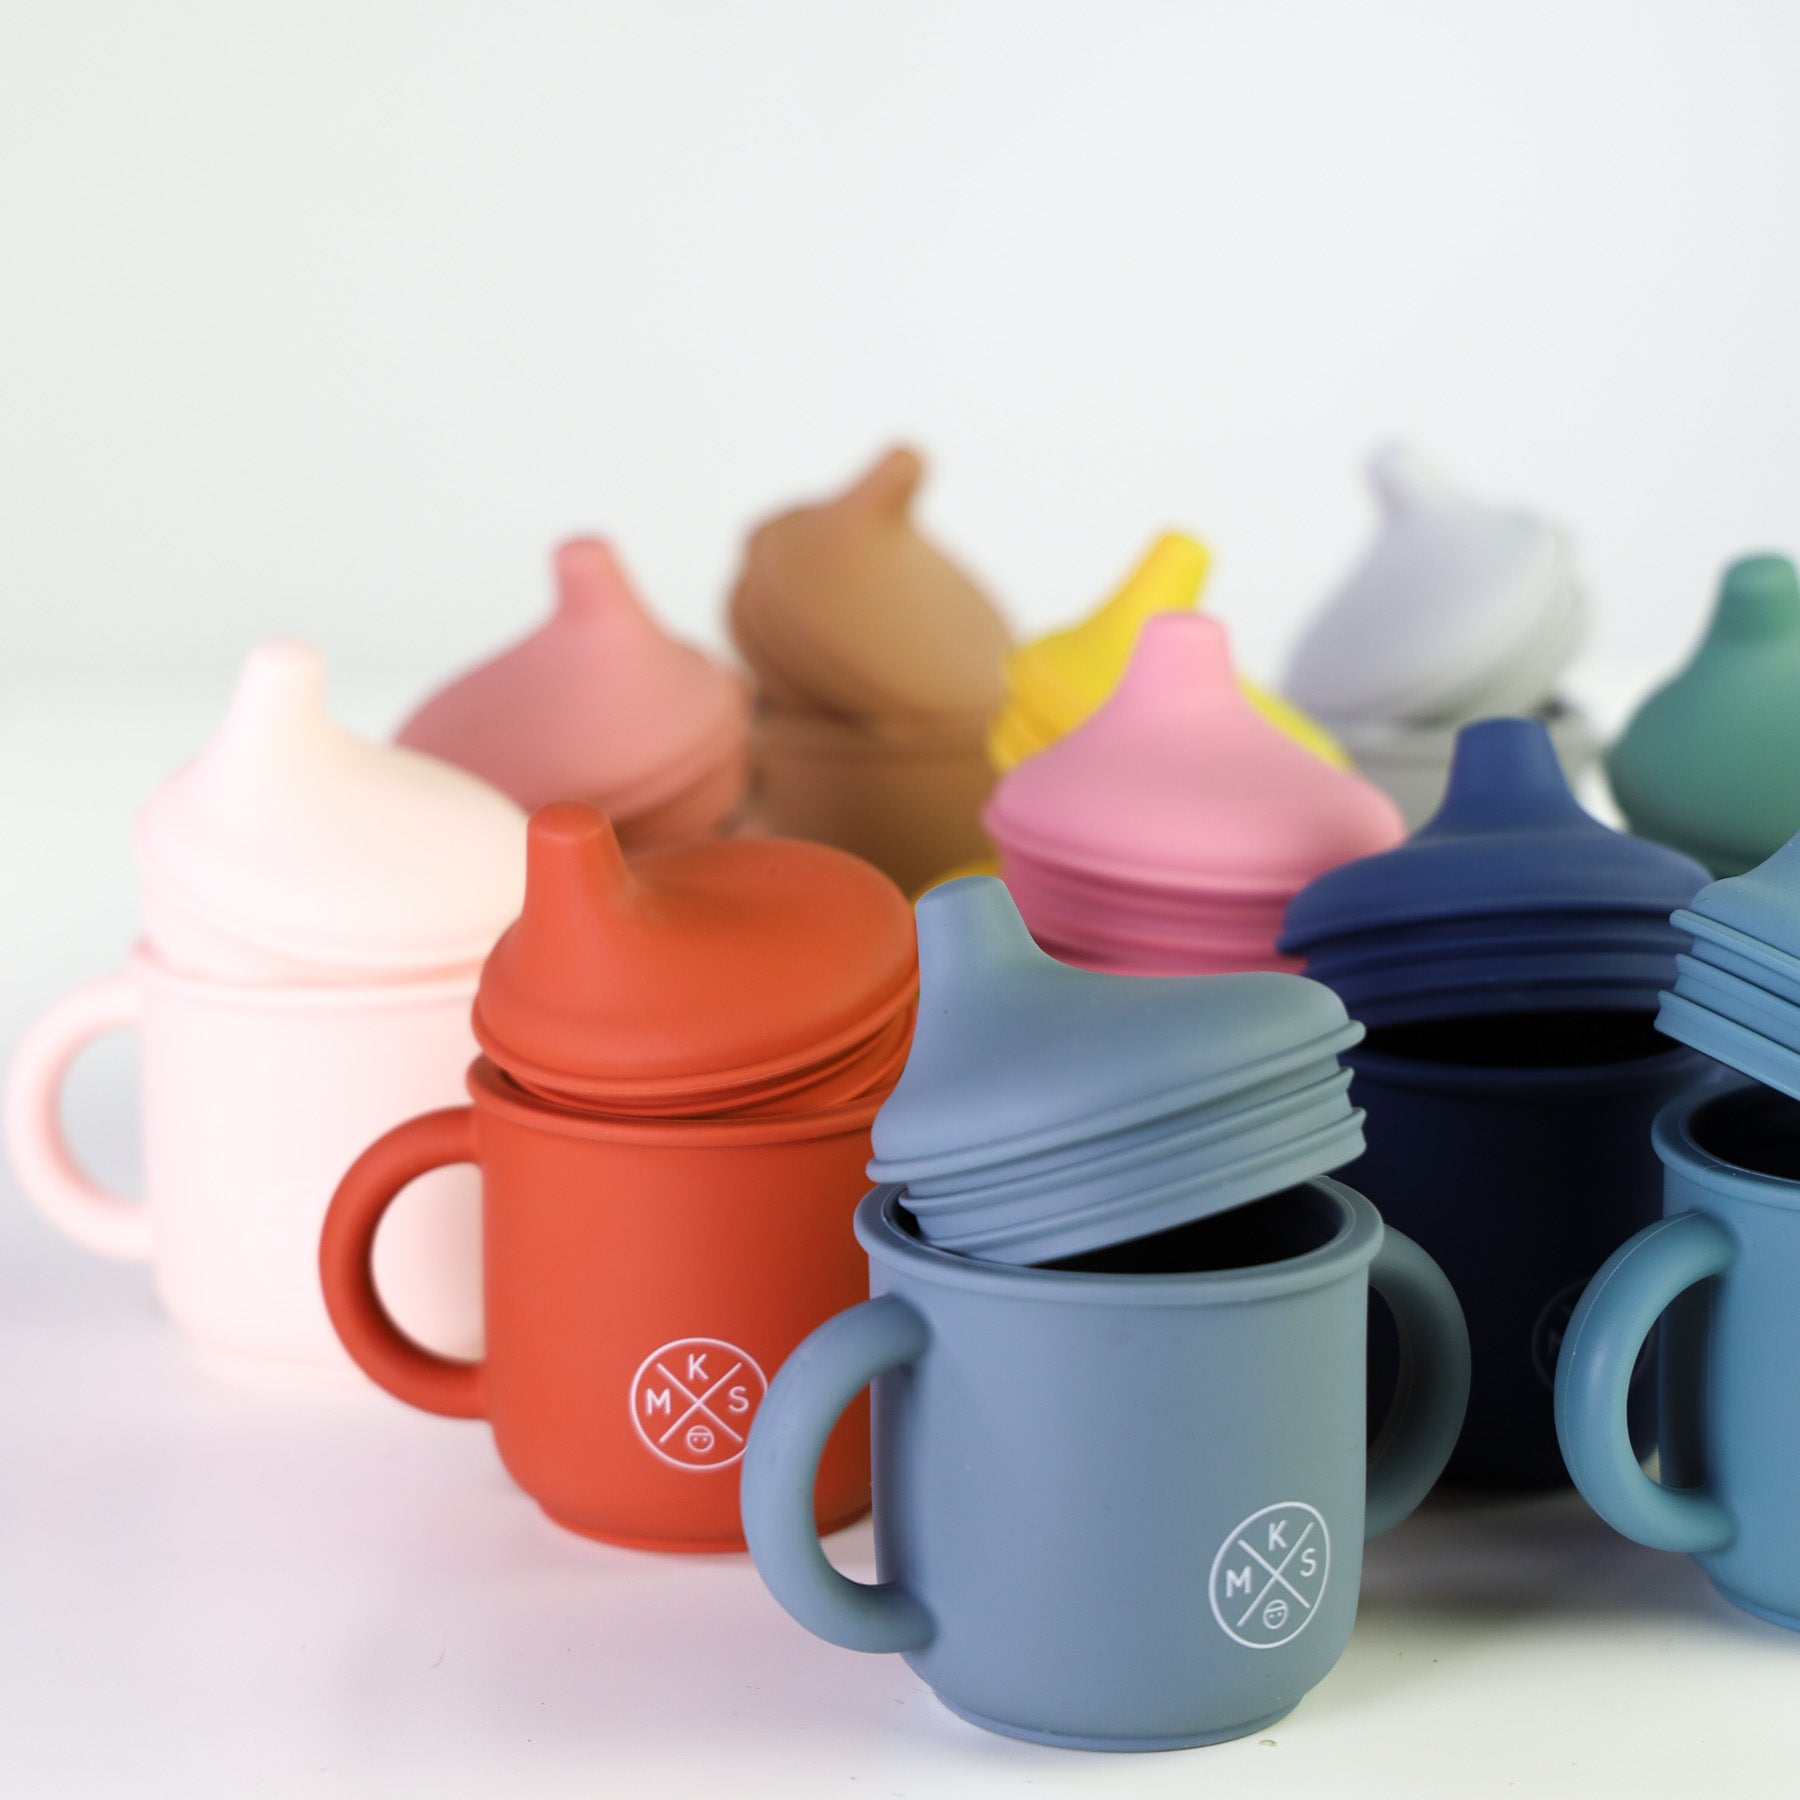 https://miminoo.com/cdn/shop/products/Silicone_sippy_cup_color_lid_learning_drinking_baby_toddler_kids_cup_with_handles_MKS_Miminoo_USA_unbreakable_durable_dinnerware_for_children-53_1800x1800.jpg?v=1677156443